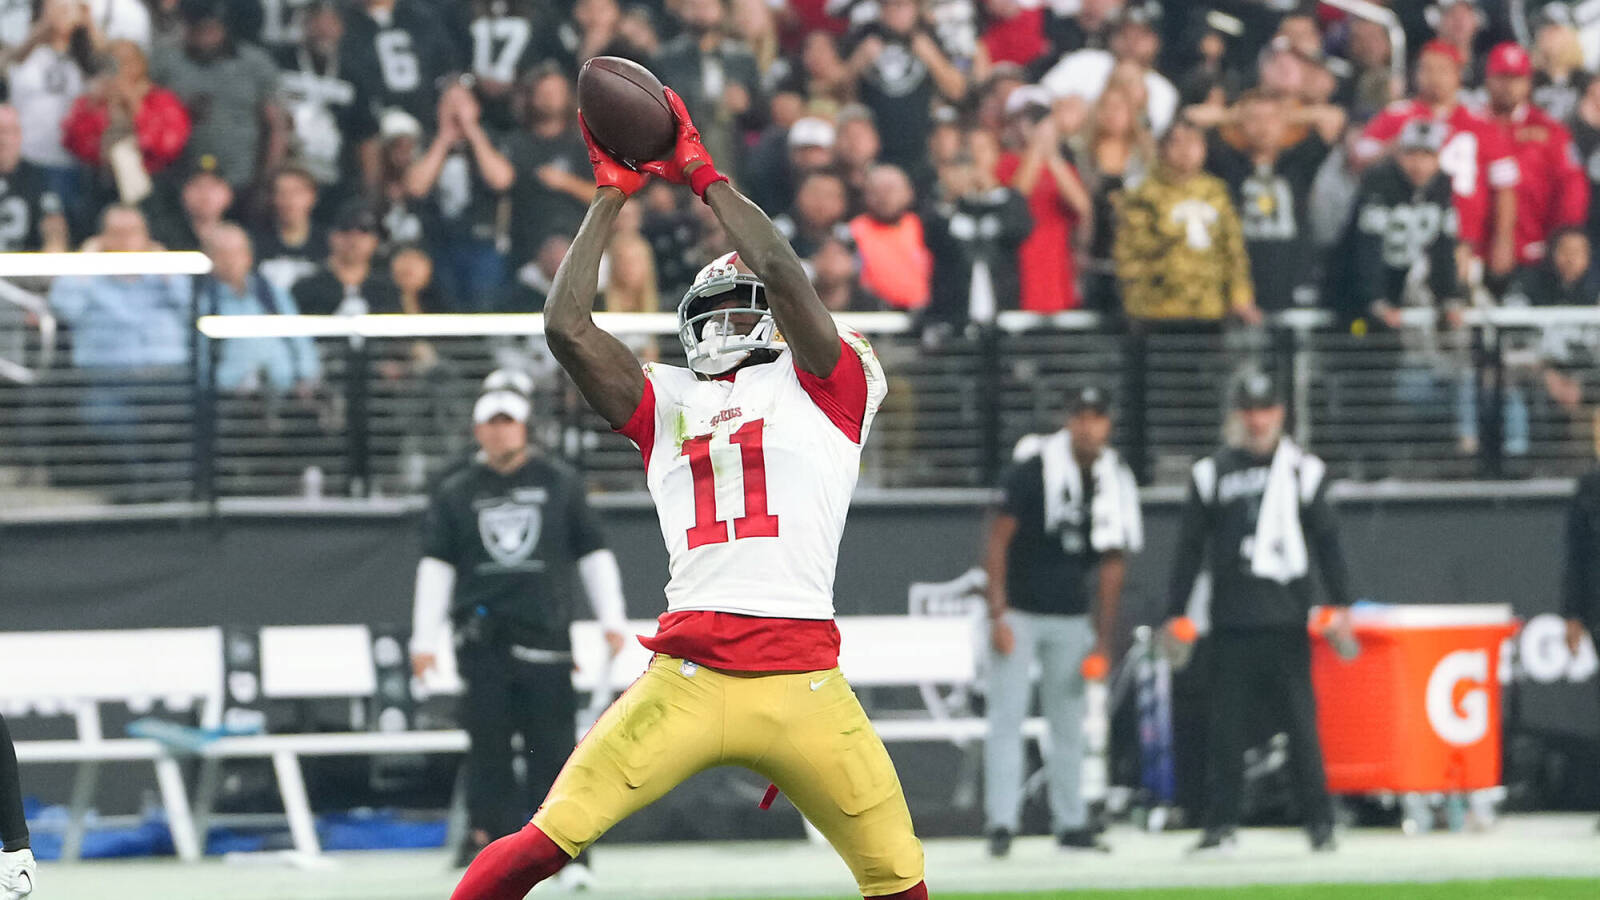 San Francisco 49ers have received trade calls for star wide receiver, deal unlikely